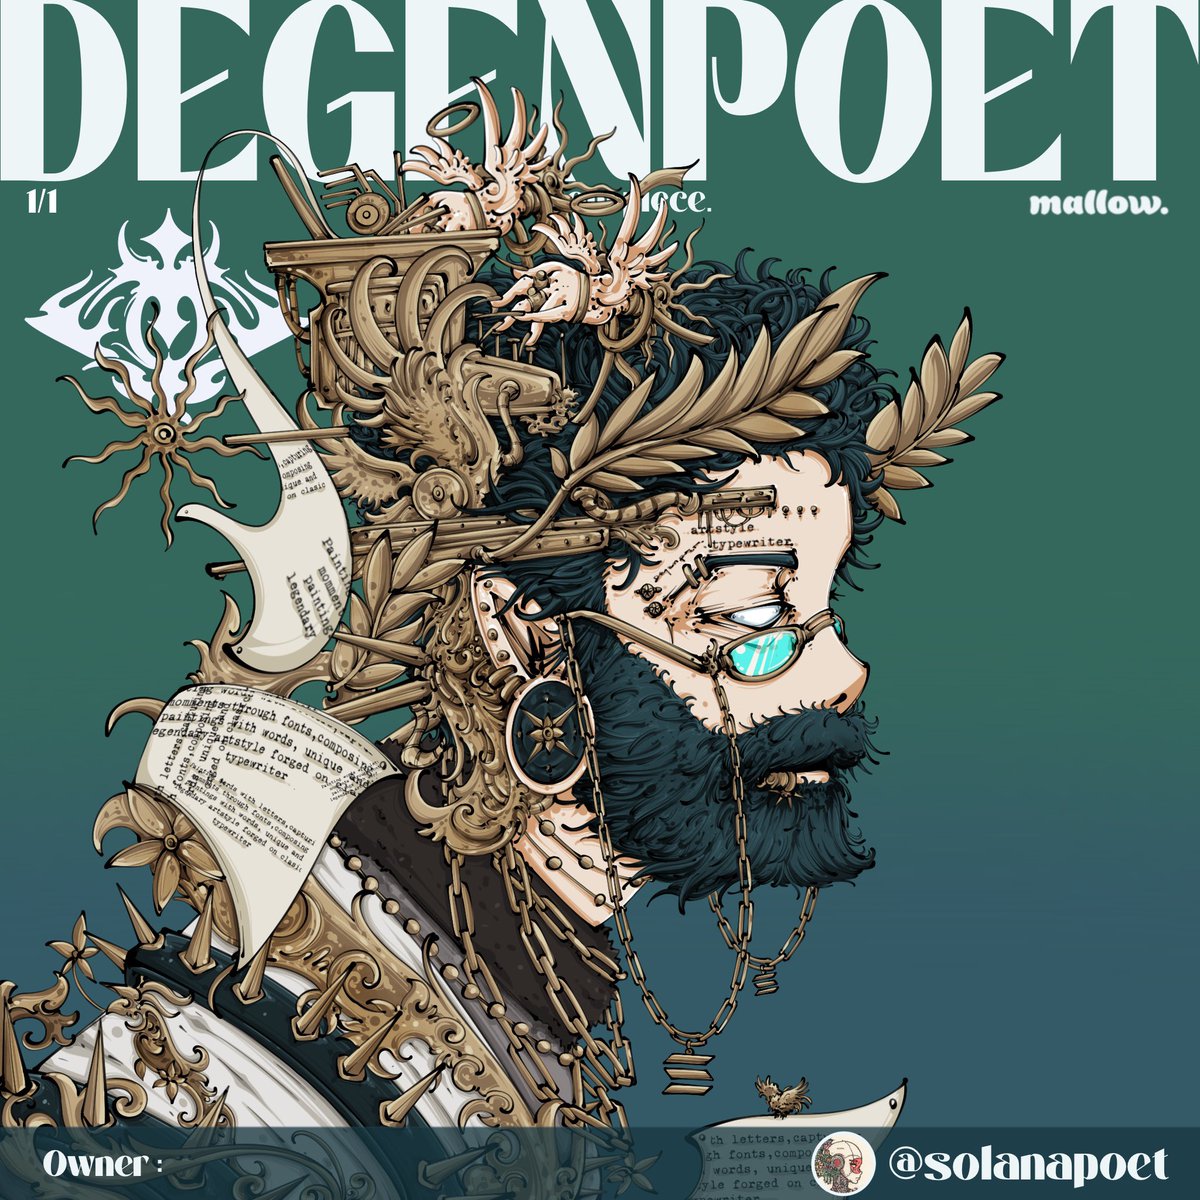 “Degenpoet”#13 Legendary typewriter with a touch of classic ornamental anime in citypunk.

1/1’s Honorary for @solanapoet 

on: @mallow__art